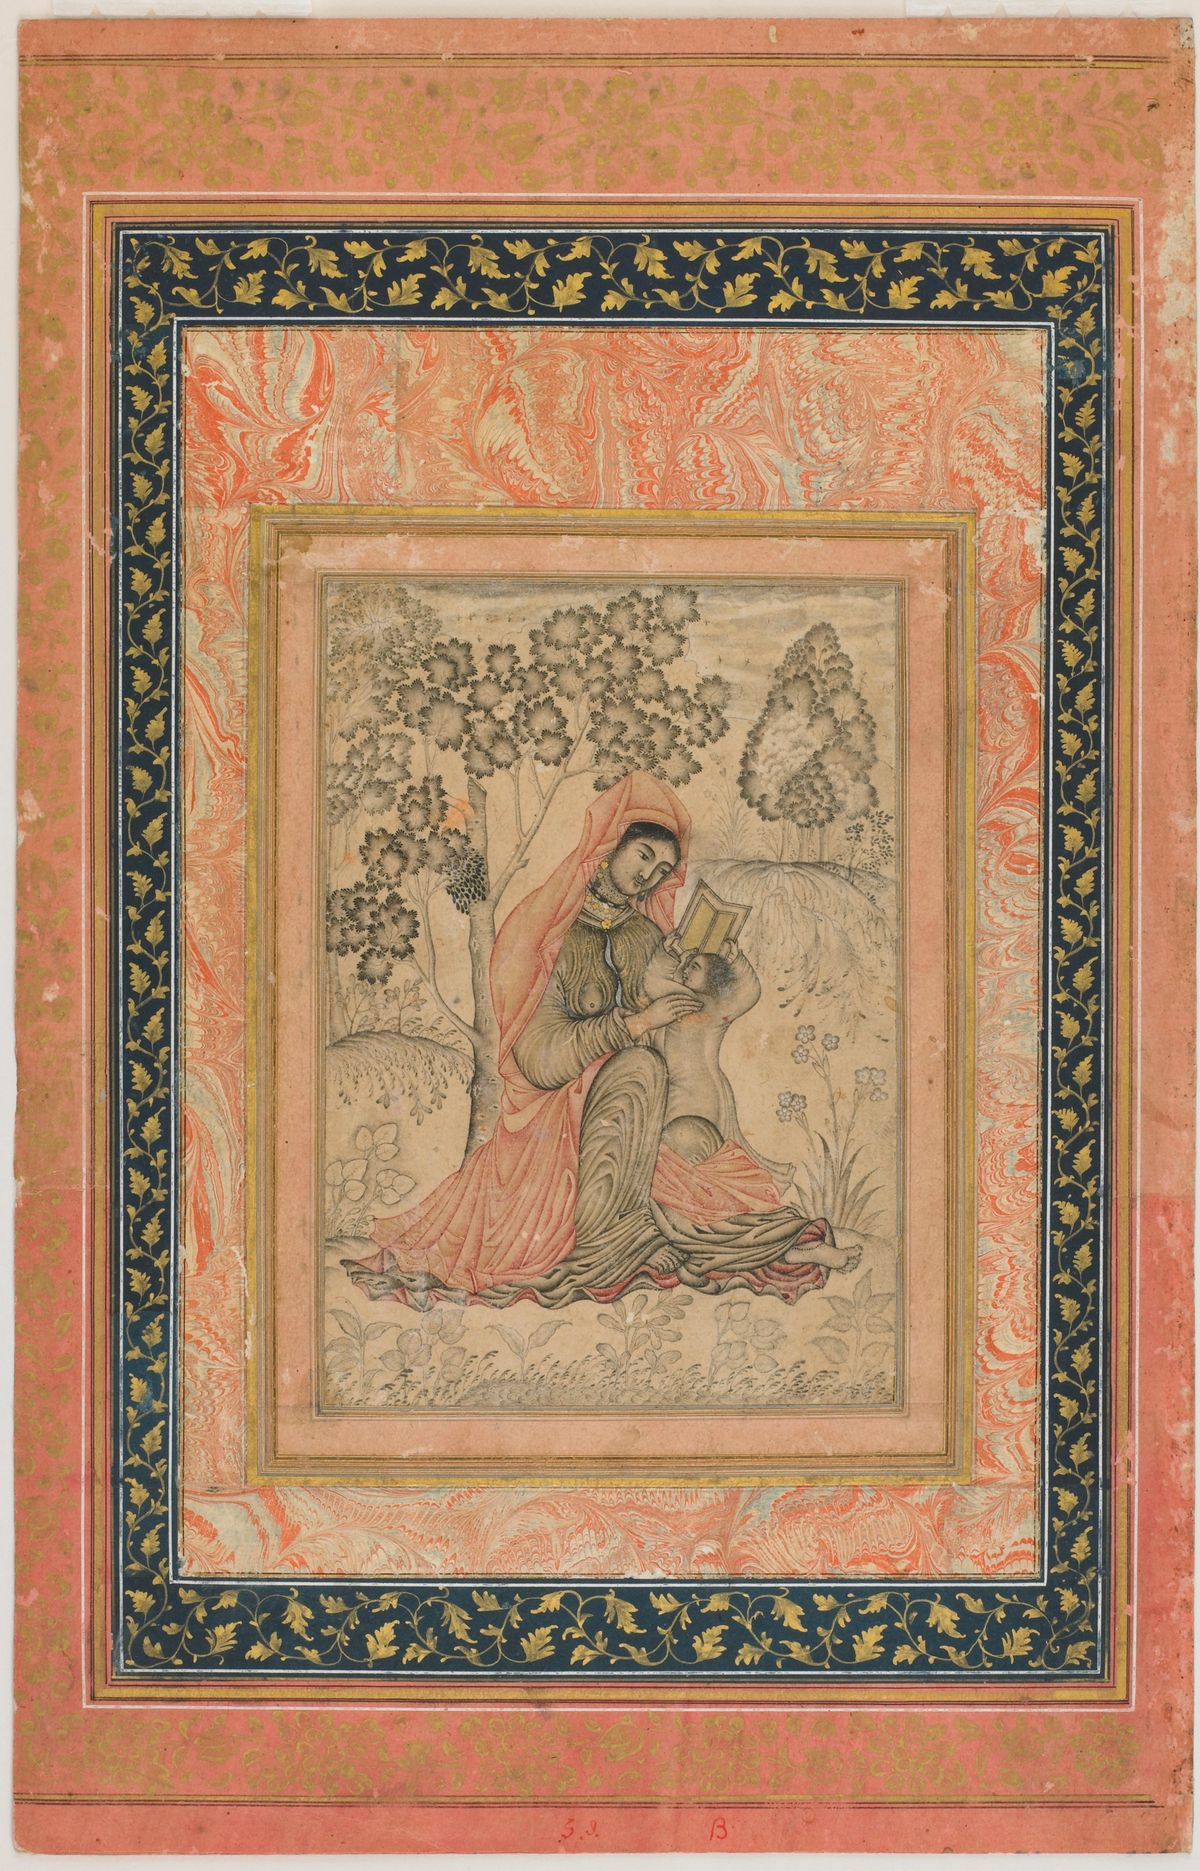 The Madonna and Child (1580-1619) probably by Farrukh Beg - Public Domain Illuminated Manuscript